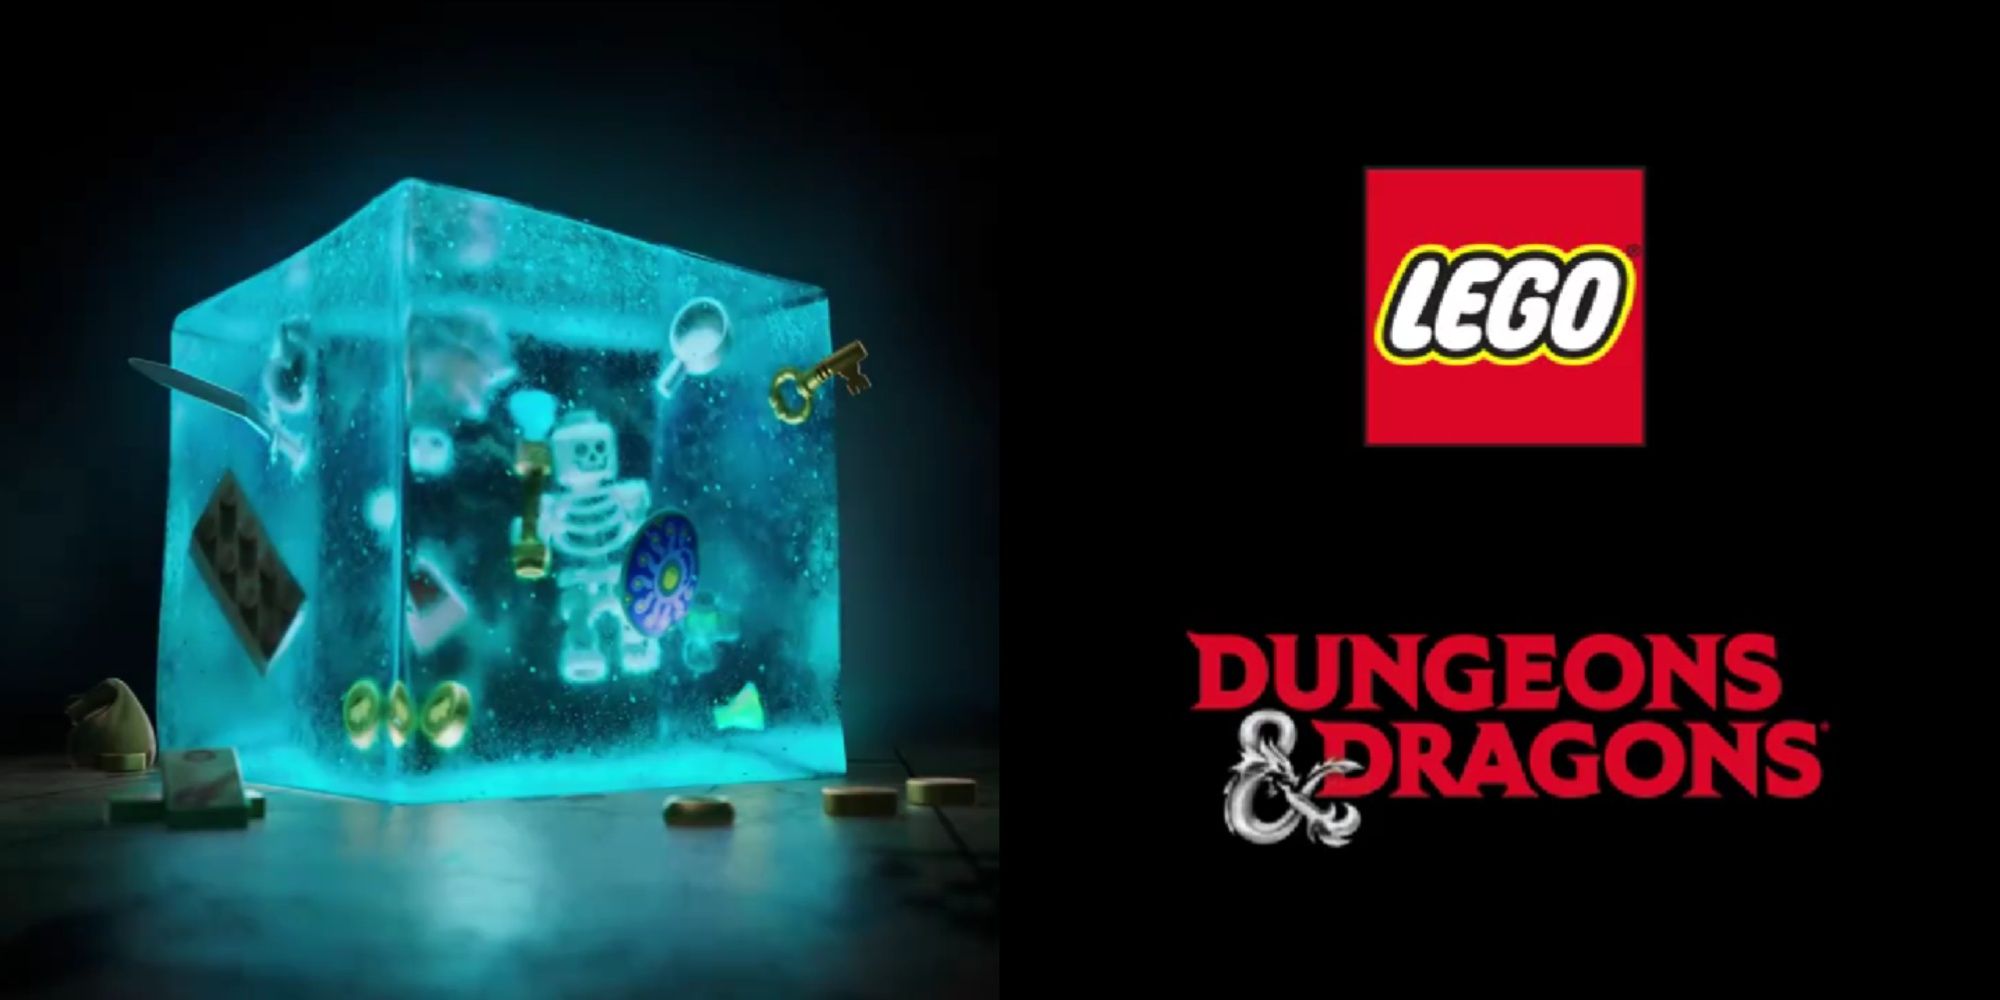 lego and gelatinous cube tease, and lego and dungeons & dragons logos